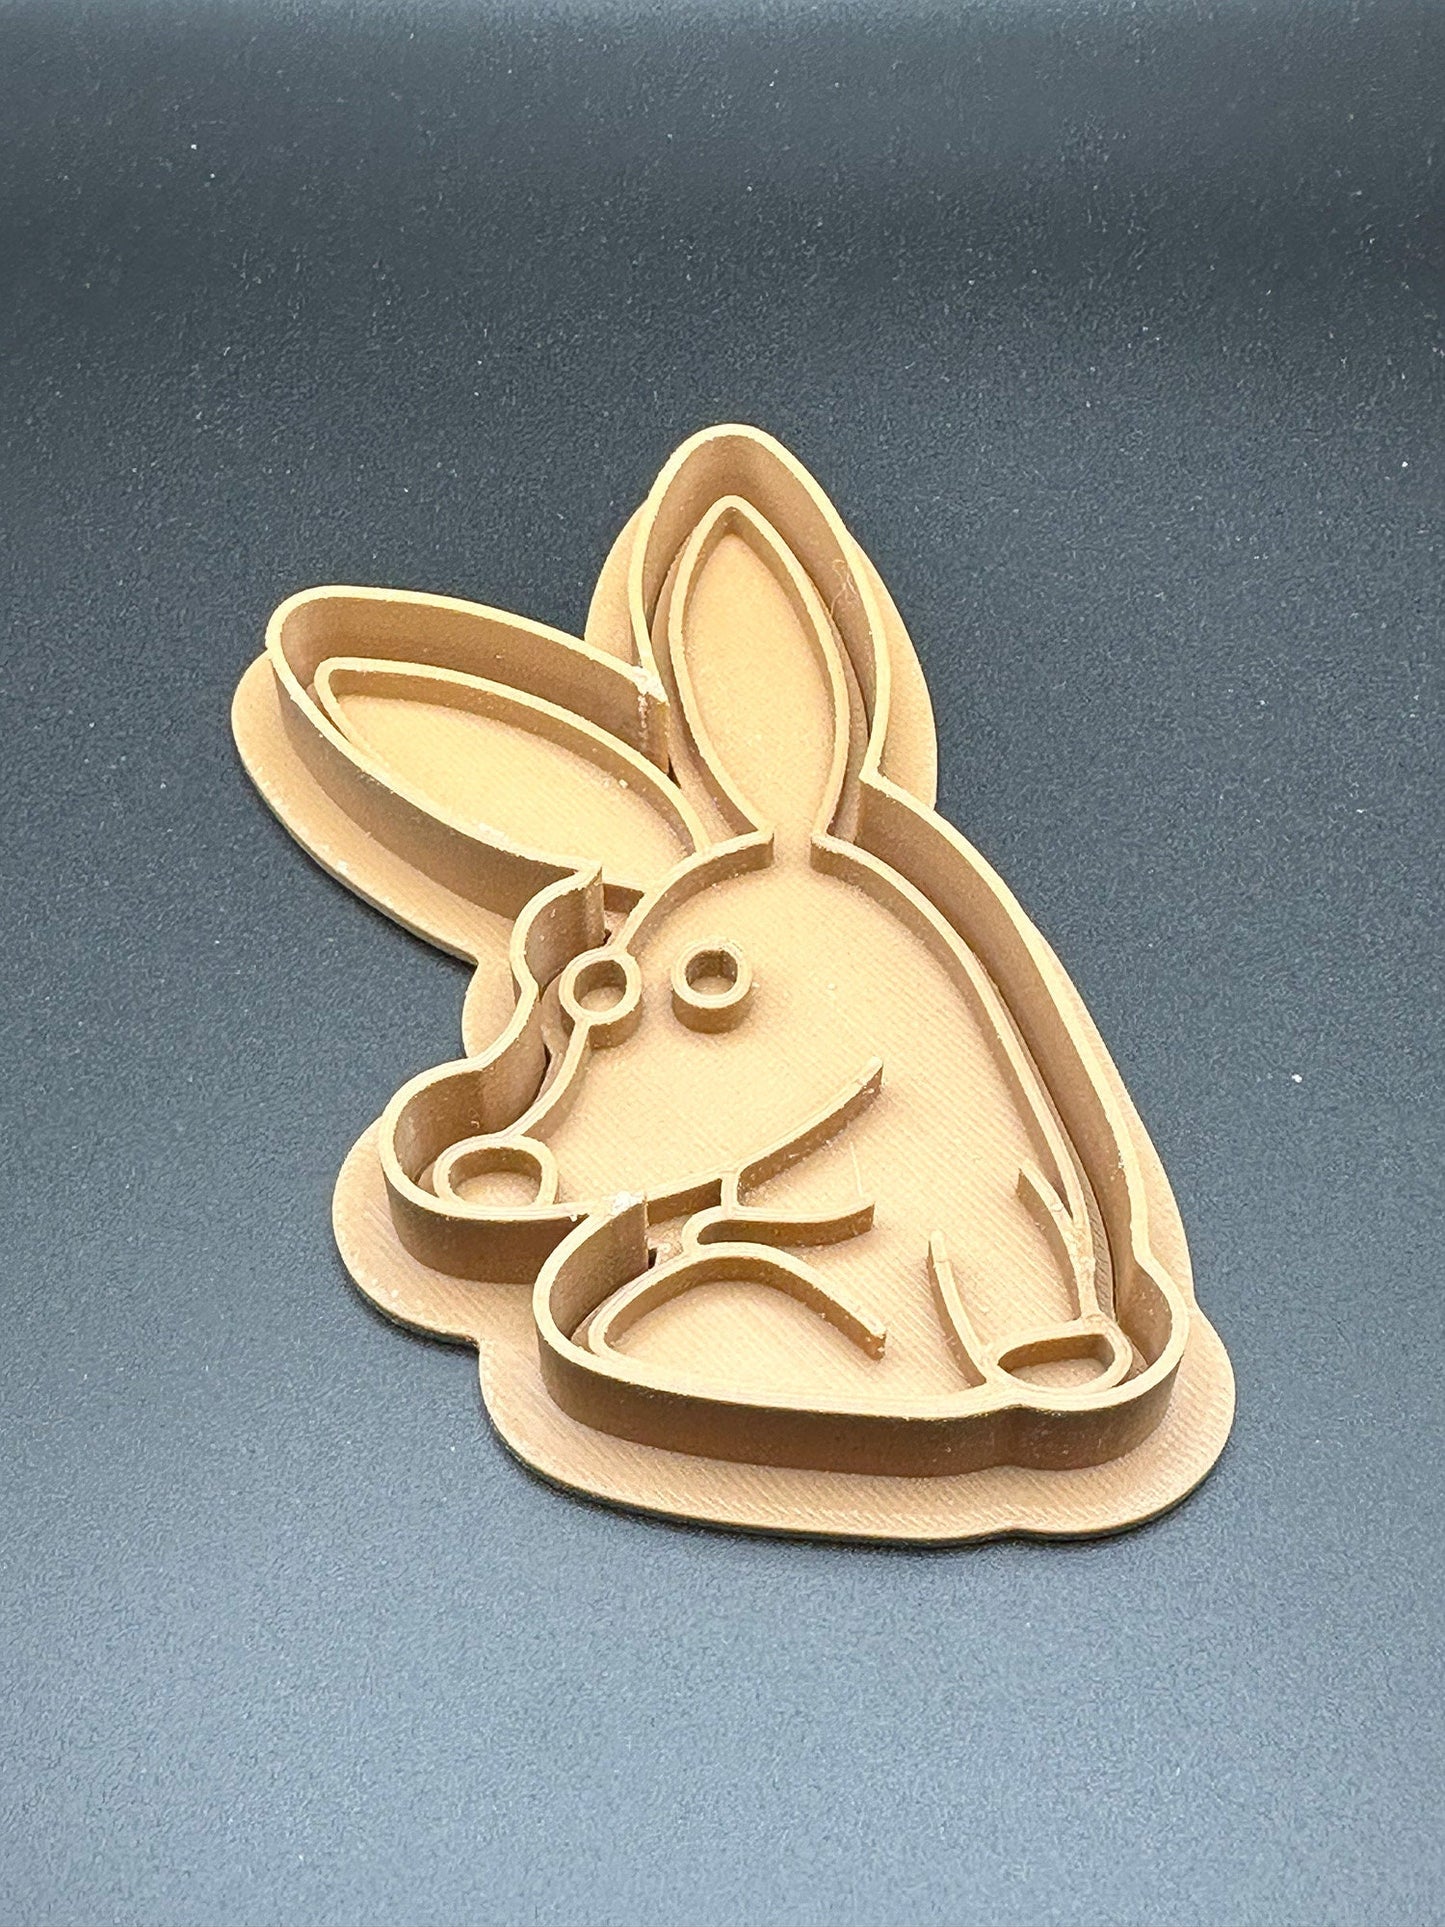 bob bilby cookie stamp and cutter